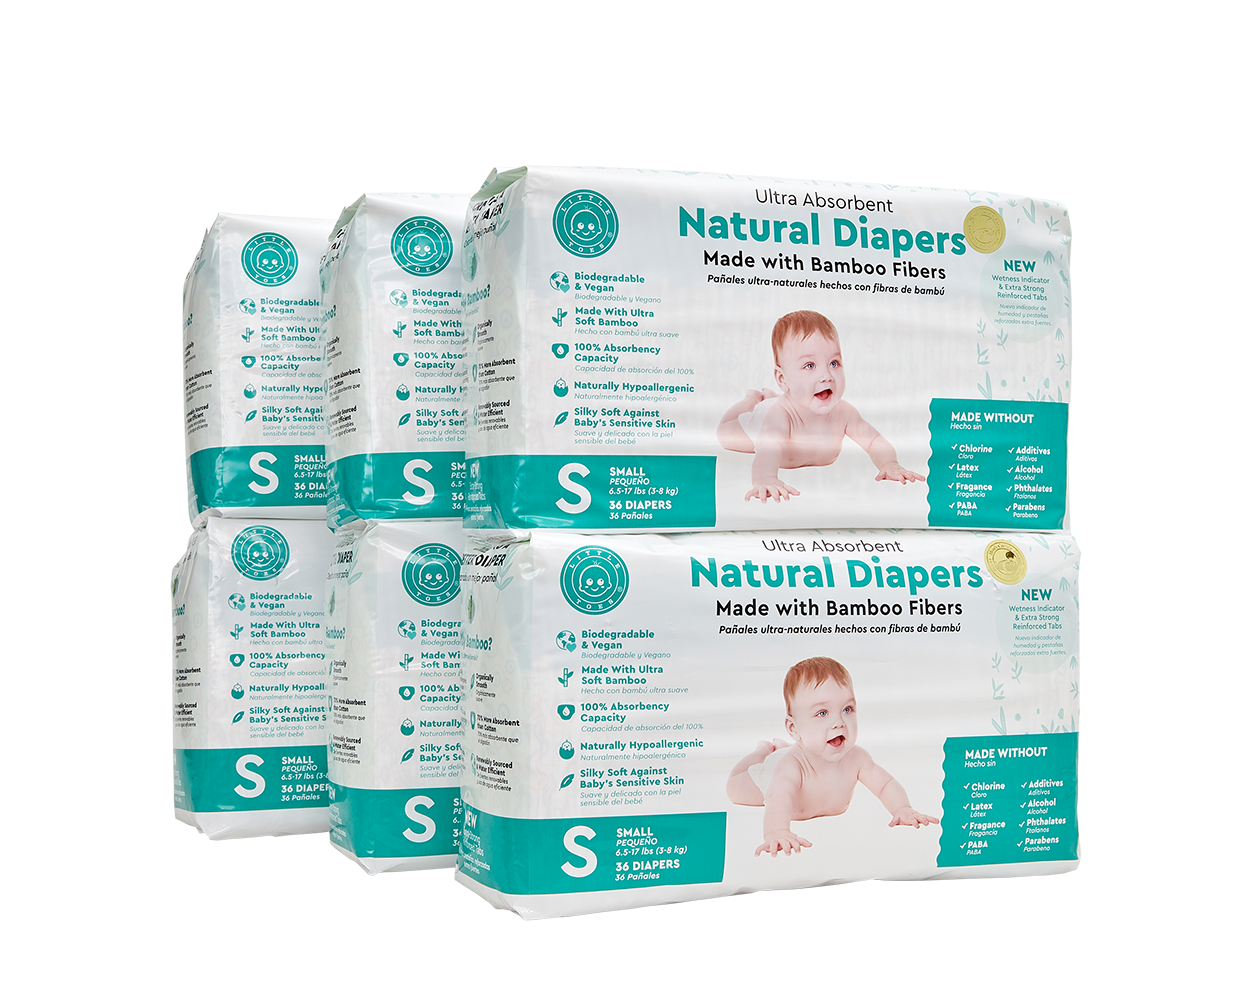 Introducing the perfect blend of comfort and sustainability: Momcozy  Natural Bamboo Baby Diapers. 